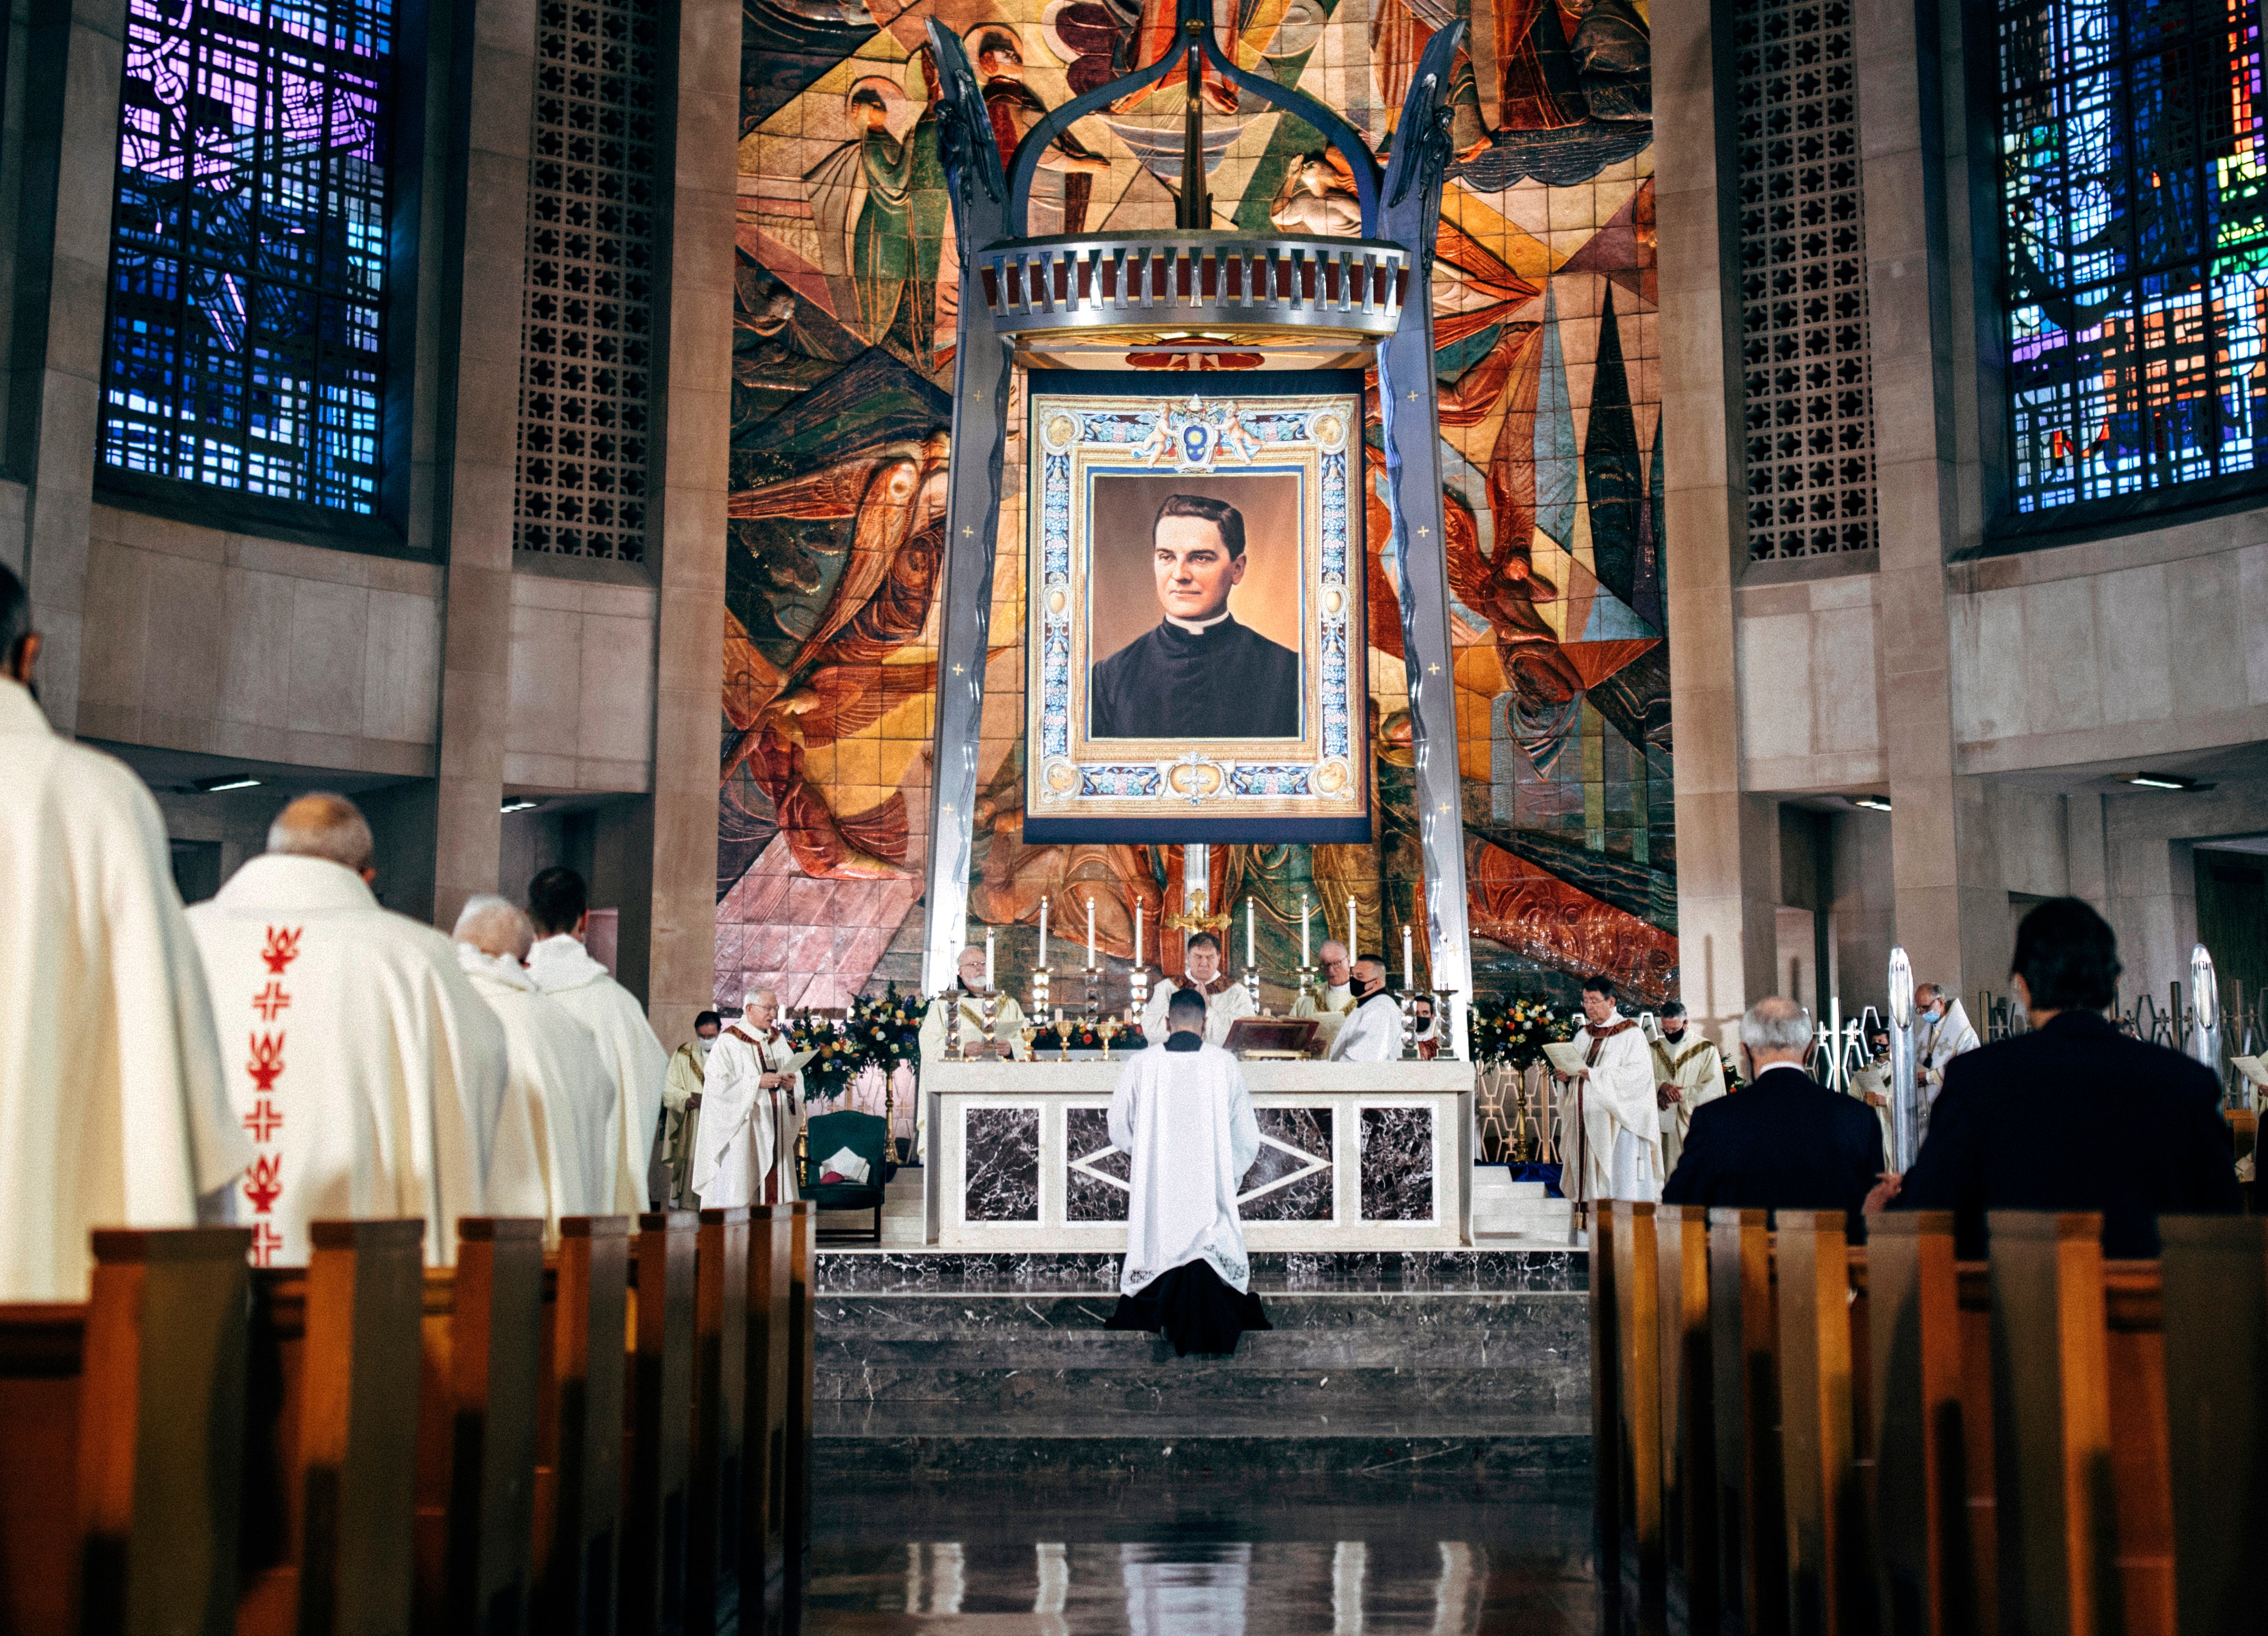 In this photo provided by the Archdiocese of Hartford, a tapestry showing Rev. Michael McGivney hangs above the alter at the Cathedral of St. Joseph in Hartford, Conn, Saturday, Oct. 31, 2020. The late Connecticut priest who founded the Knights of Columbus moved a step closer to possible sainthood with his beatification Saturday, as authorized by Pope Francis. (Archdiocese of Hartford via AP)